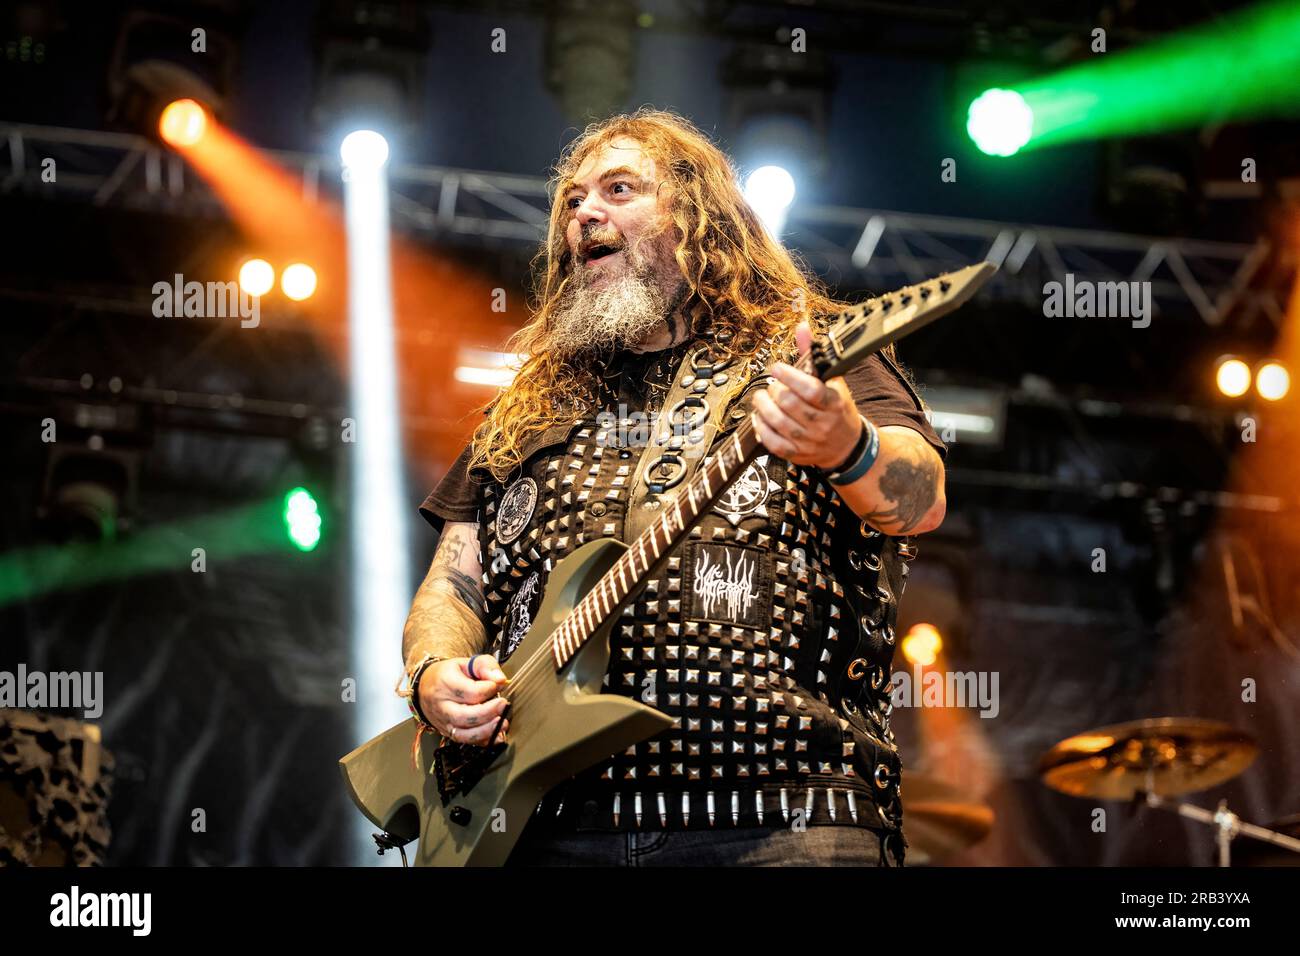 Photo Gallery : Cavalera Brothers Bring The Metal To Tacoma